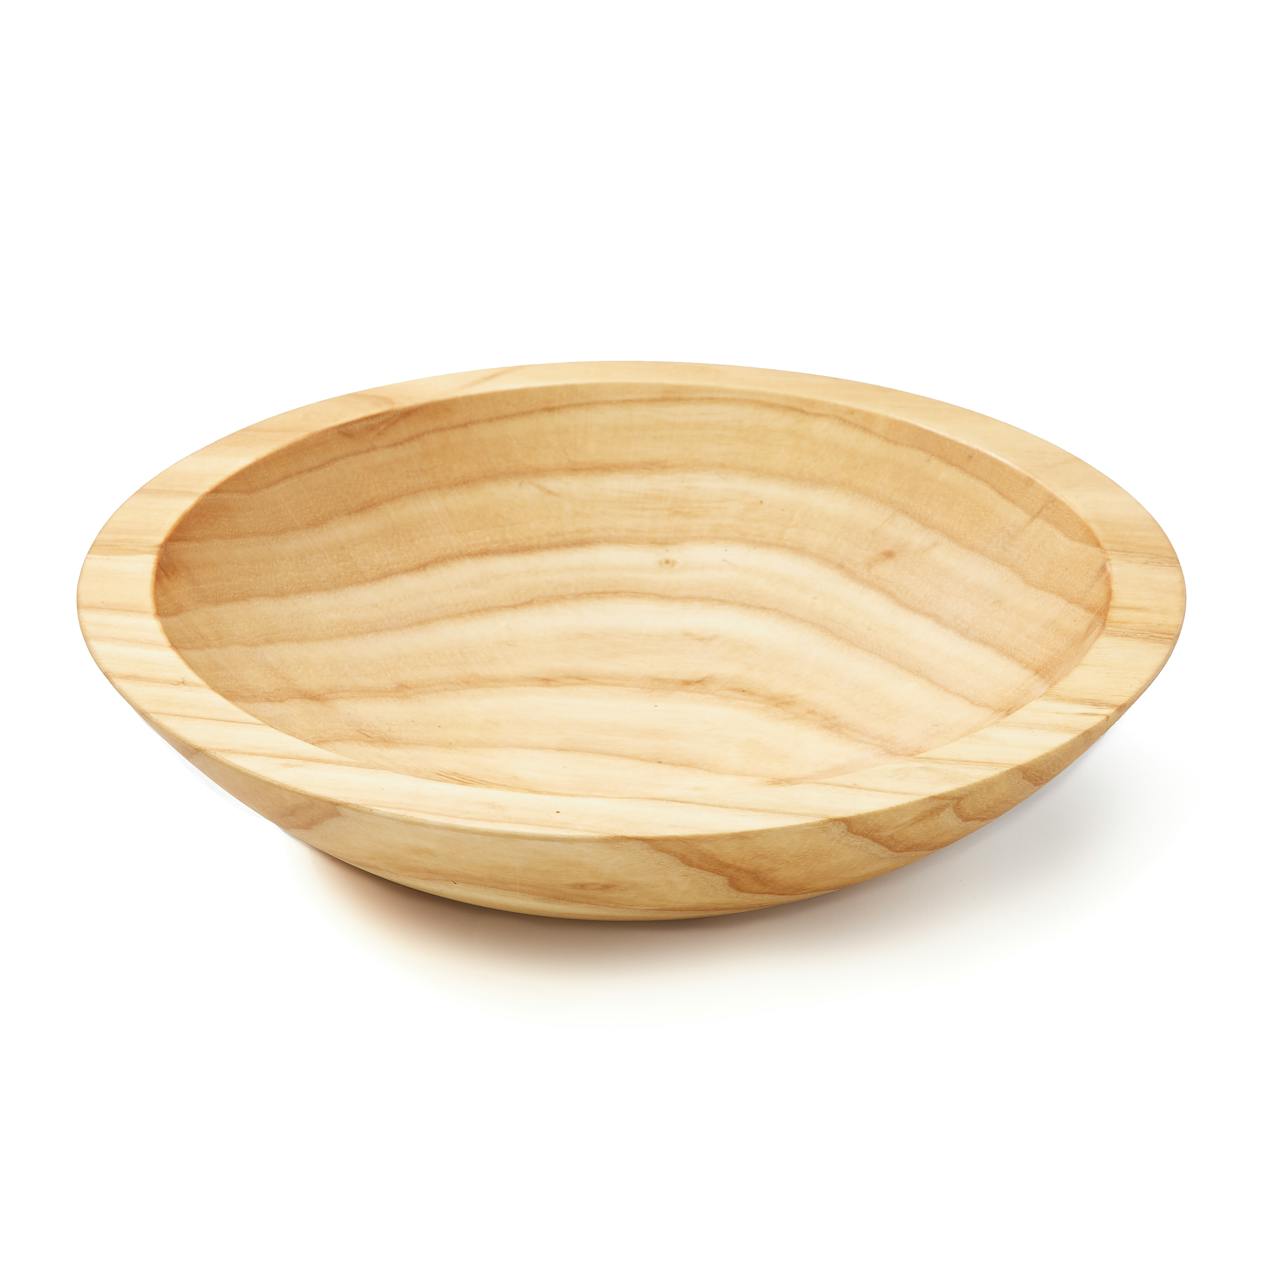 Farmhouse Pottery Crafted Wooden Bowl